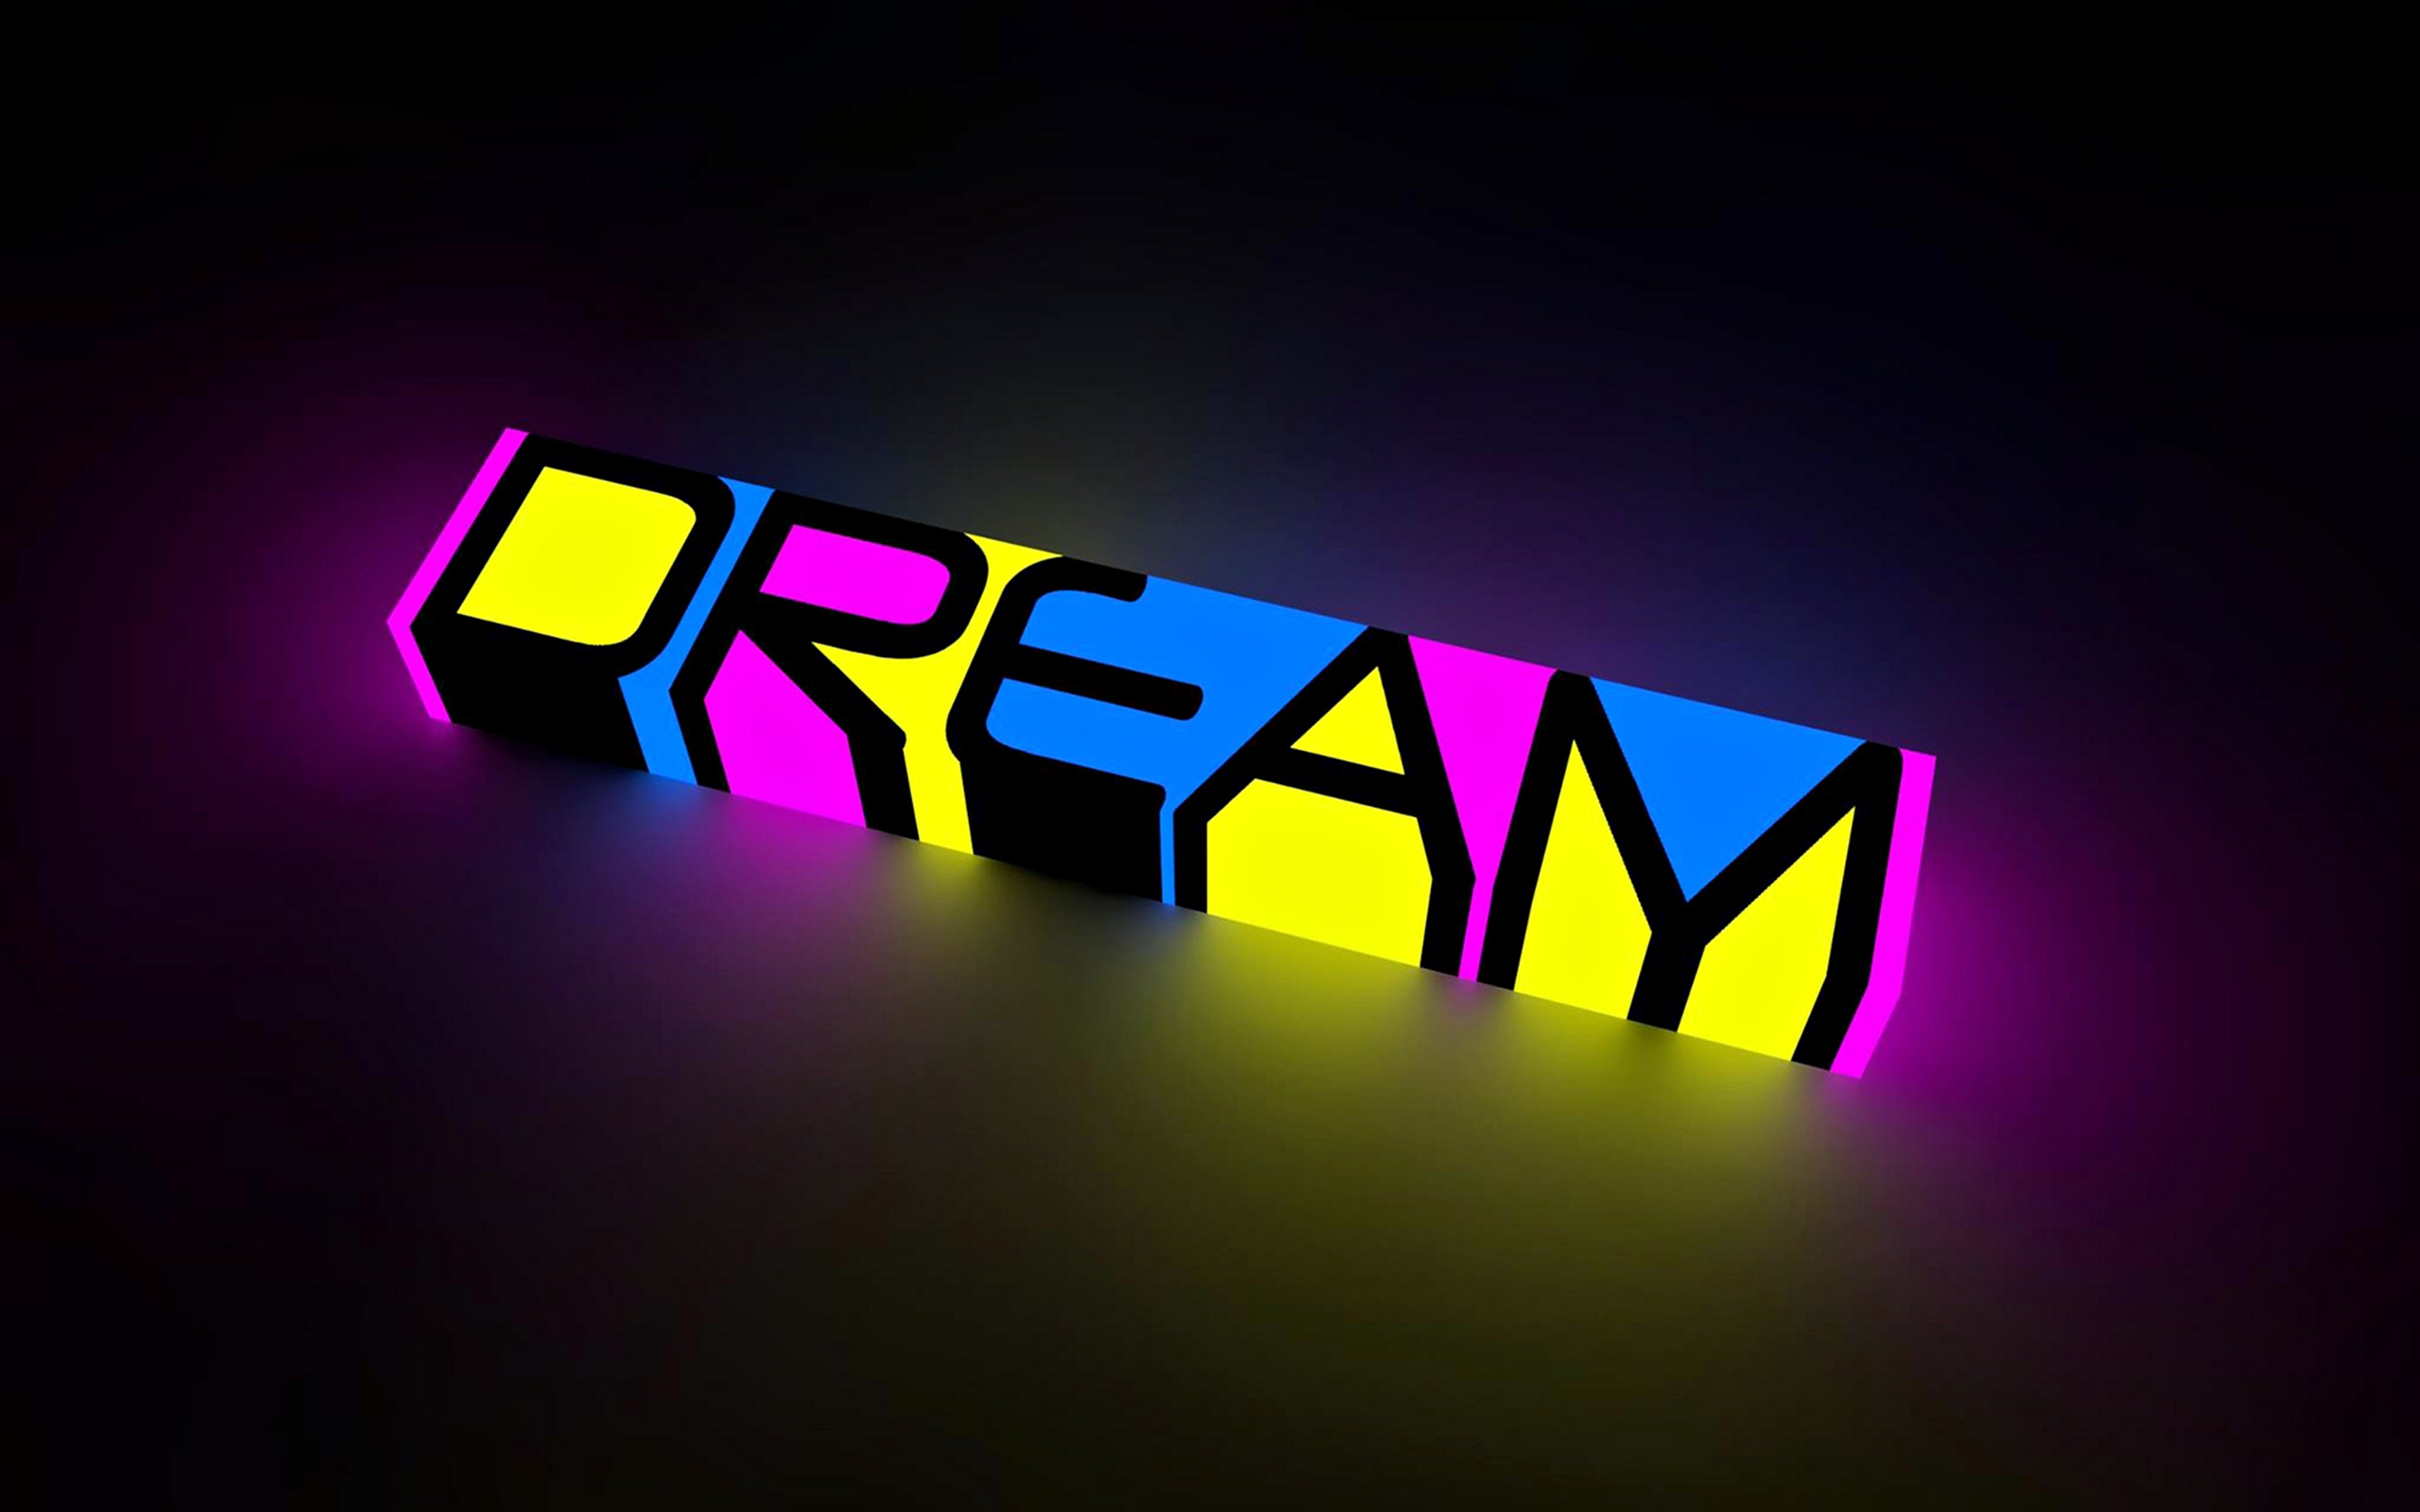 abstract, Dream, Colors, Neon, Bright, Words, Letters, Motivational